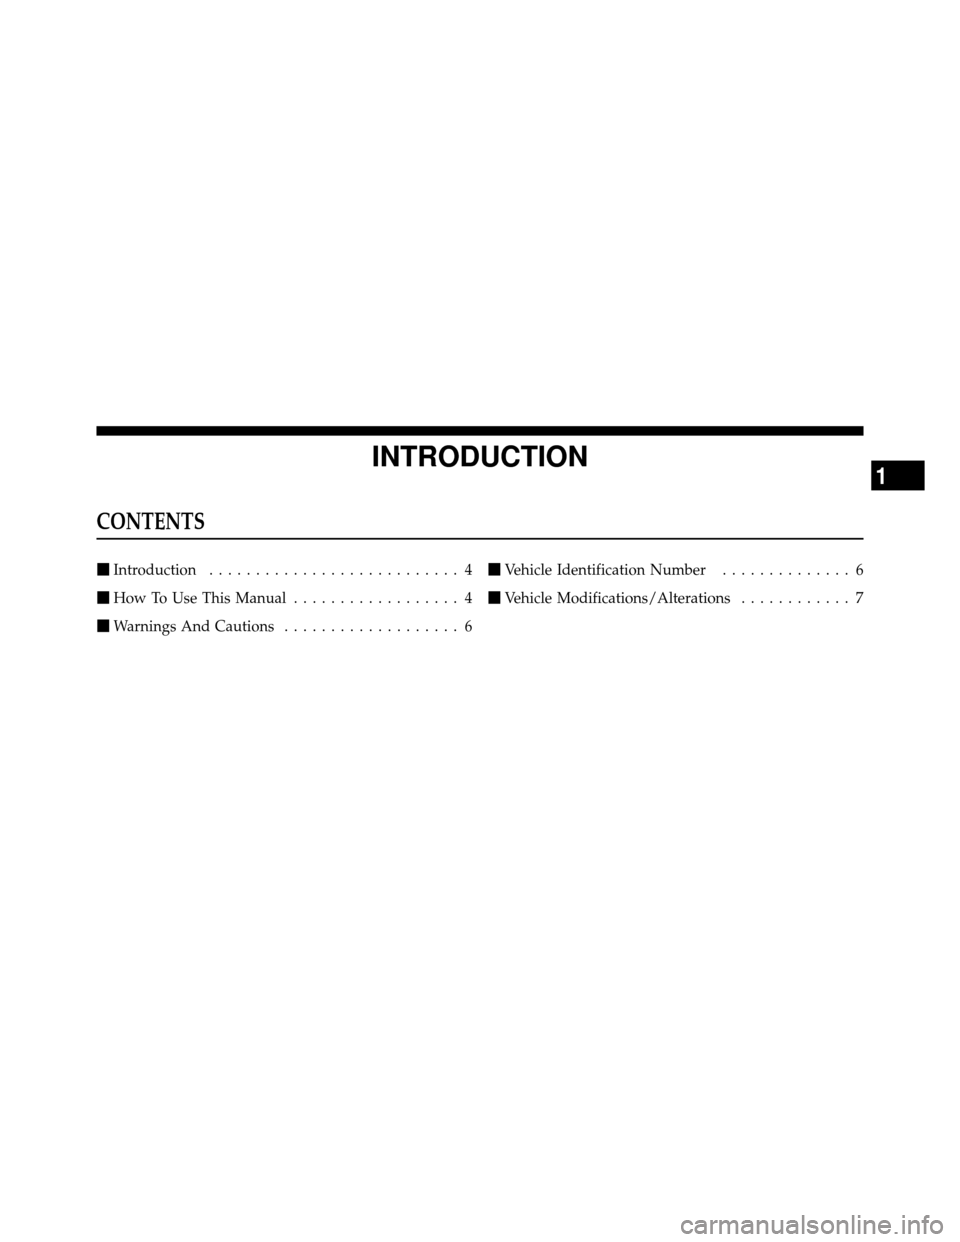 CHRYSLER 200 2011 1.G Owners Manual INTRODUCTION
CONTENTS
Introduction ........................... 4
 How To Use This Manual .................. 4
 Warnings And Cautions ................... 6 
Vehicle Identification Number ..........